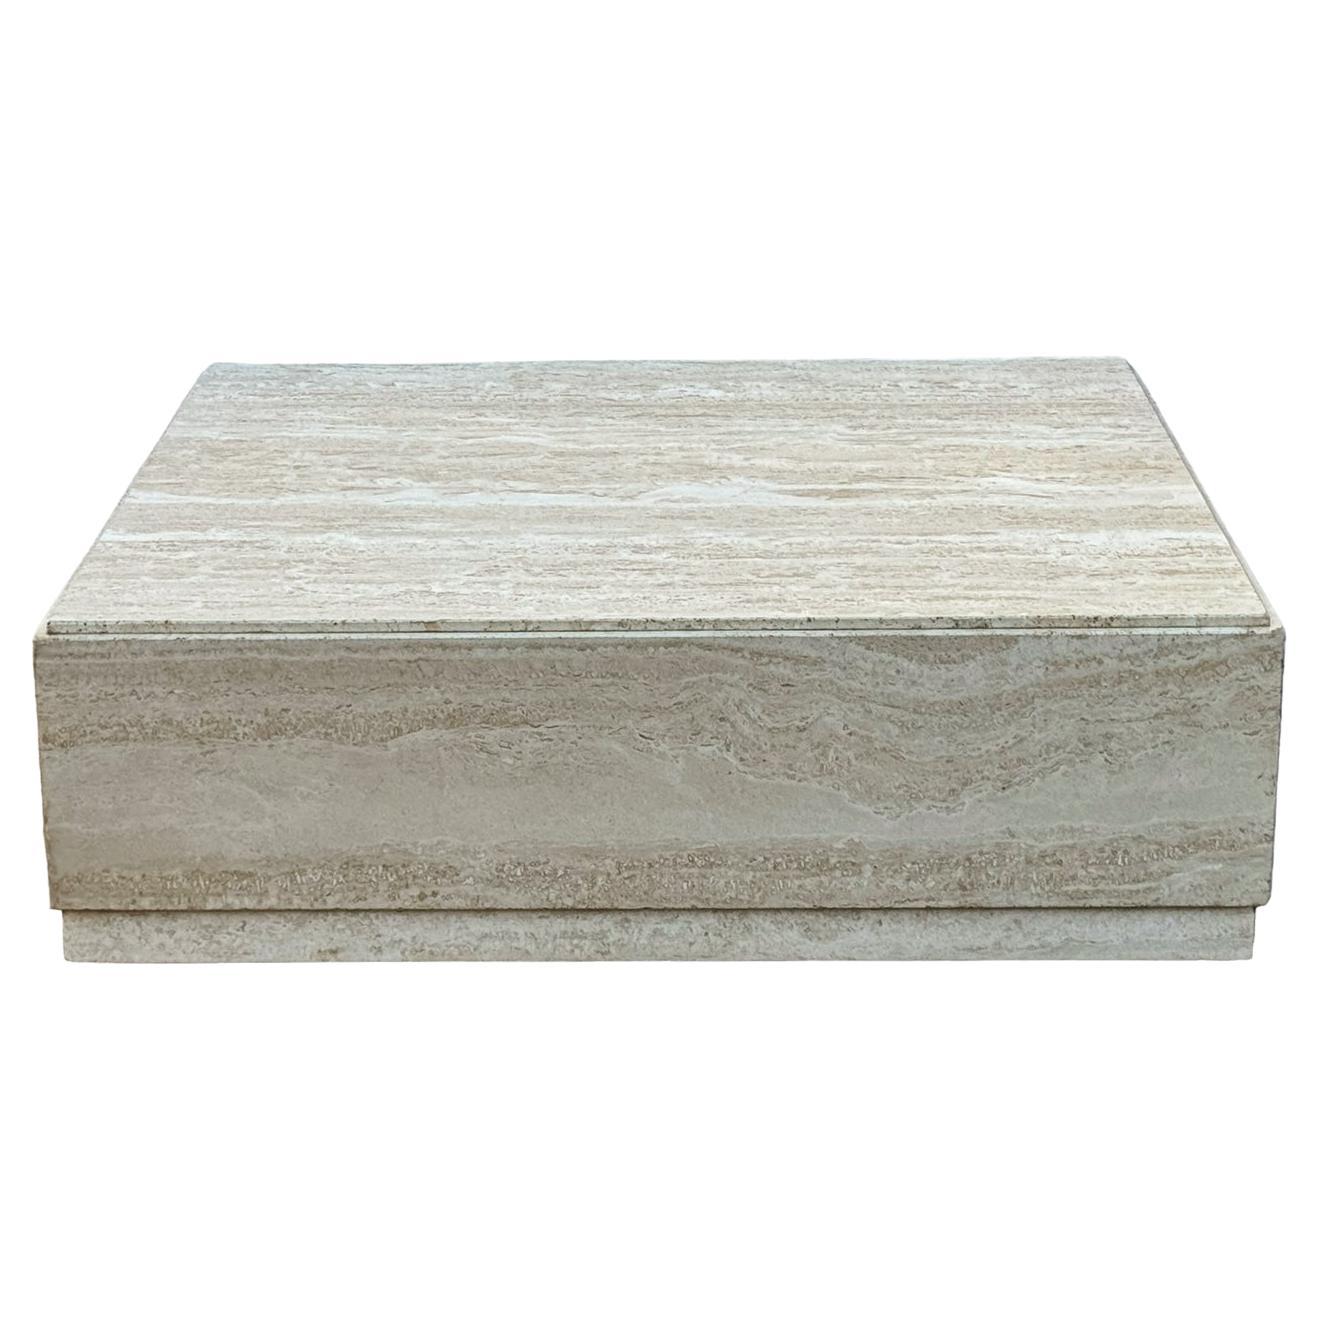 Low Midcentury Italian Modern Square Travertine Marble Cube Cocktail Table  en vente